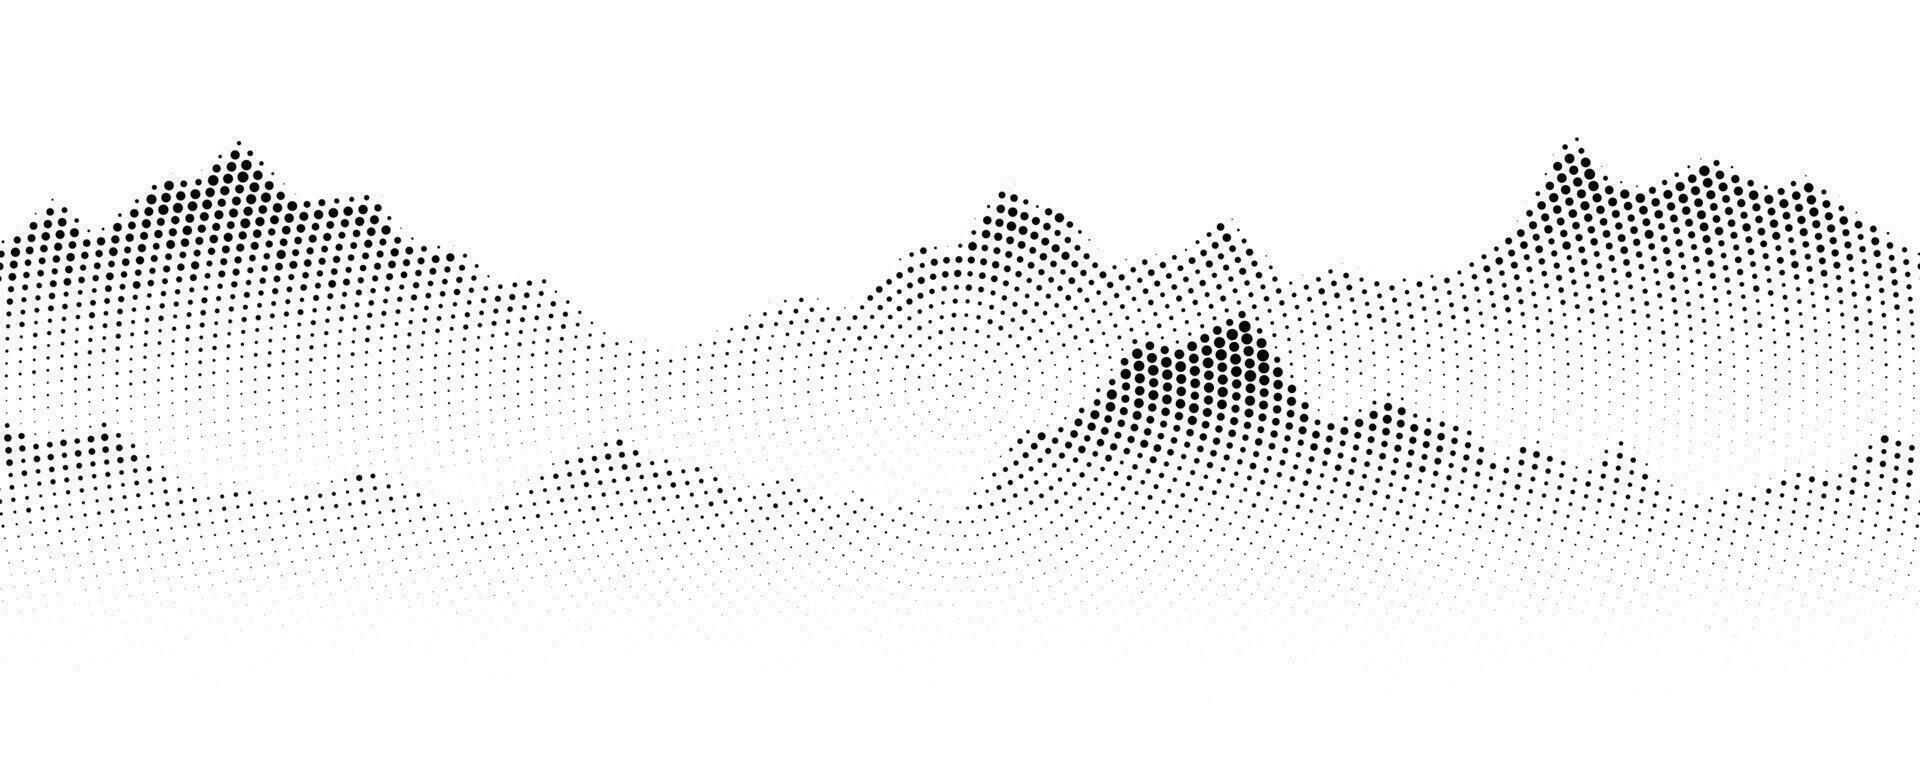 Dotted mountain gradient background. Noisy stippled grainy texture. Abstract rocks landscape with peaks with sand effect. Vector halftone fade illustration